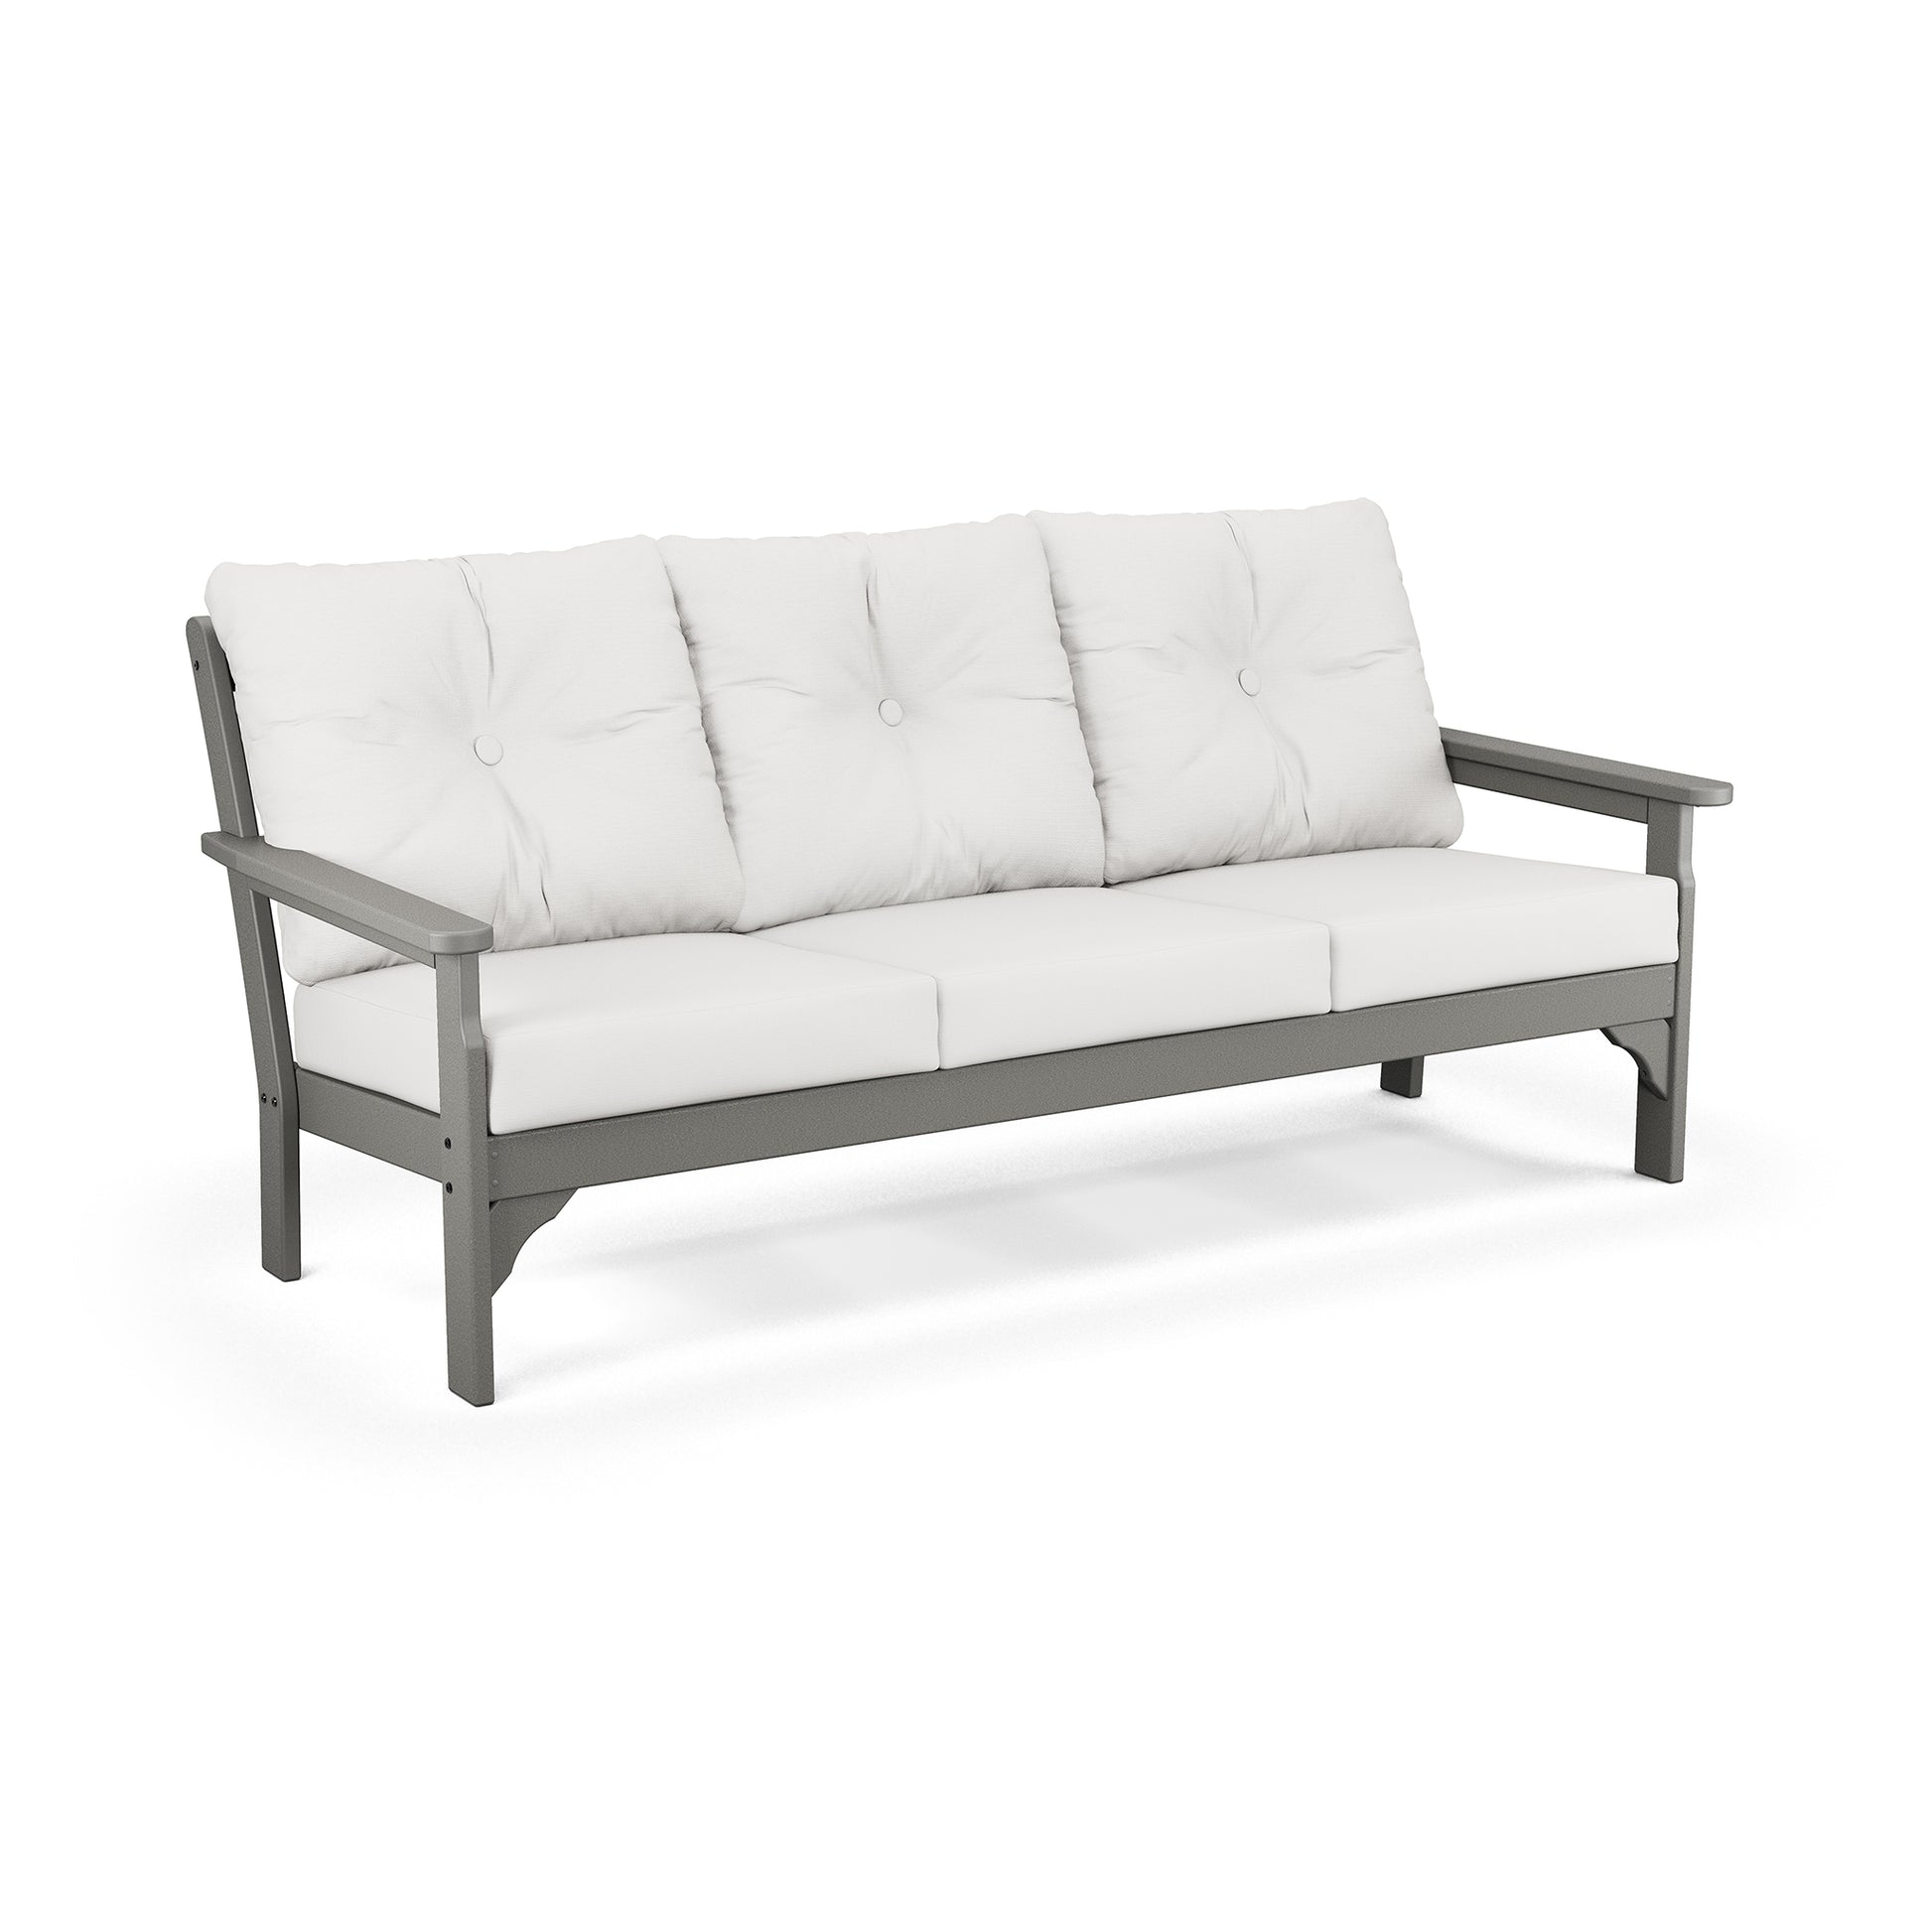 A minimalist POLYWOOD Vineyard Deep Seating Sofa with a gray POLYWOOD frame and white cushions, featuring a simple, clean design suitable for modern patios.